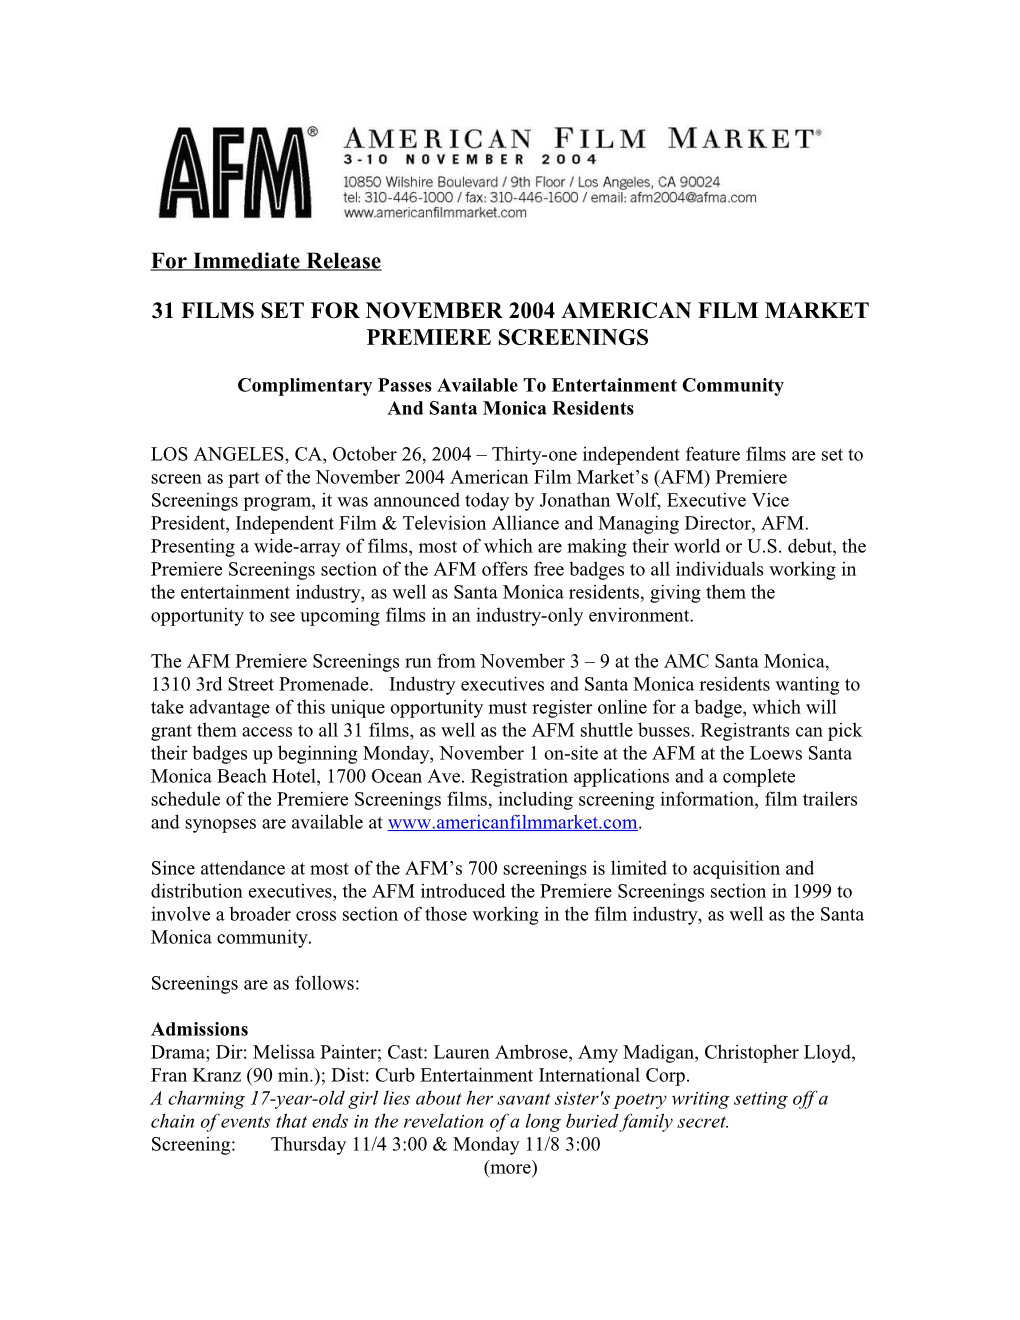 While the AFM Screenings Are Limited to Acquisition and Distribution Executives, AFM Will